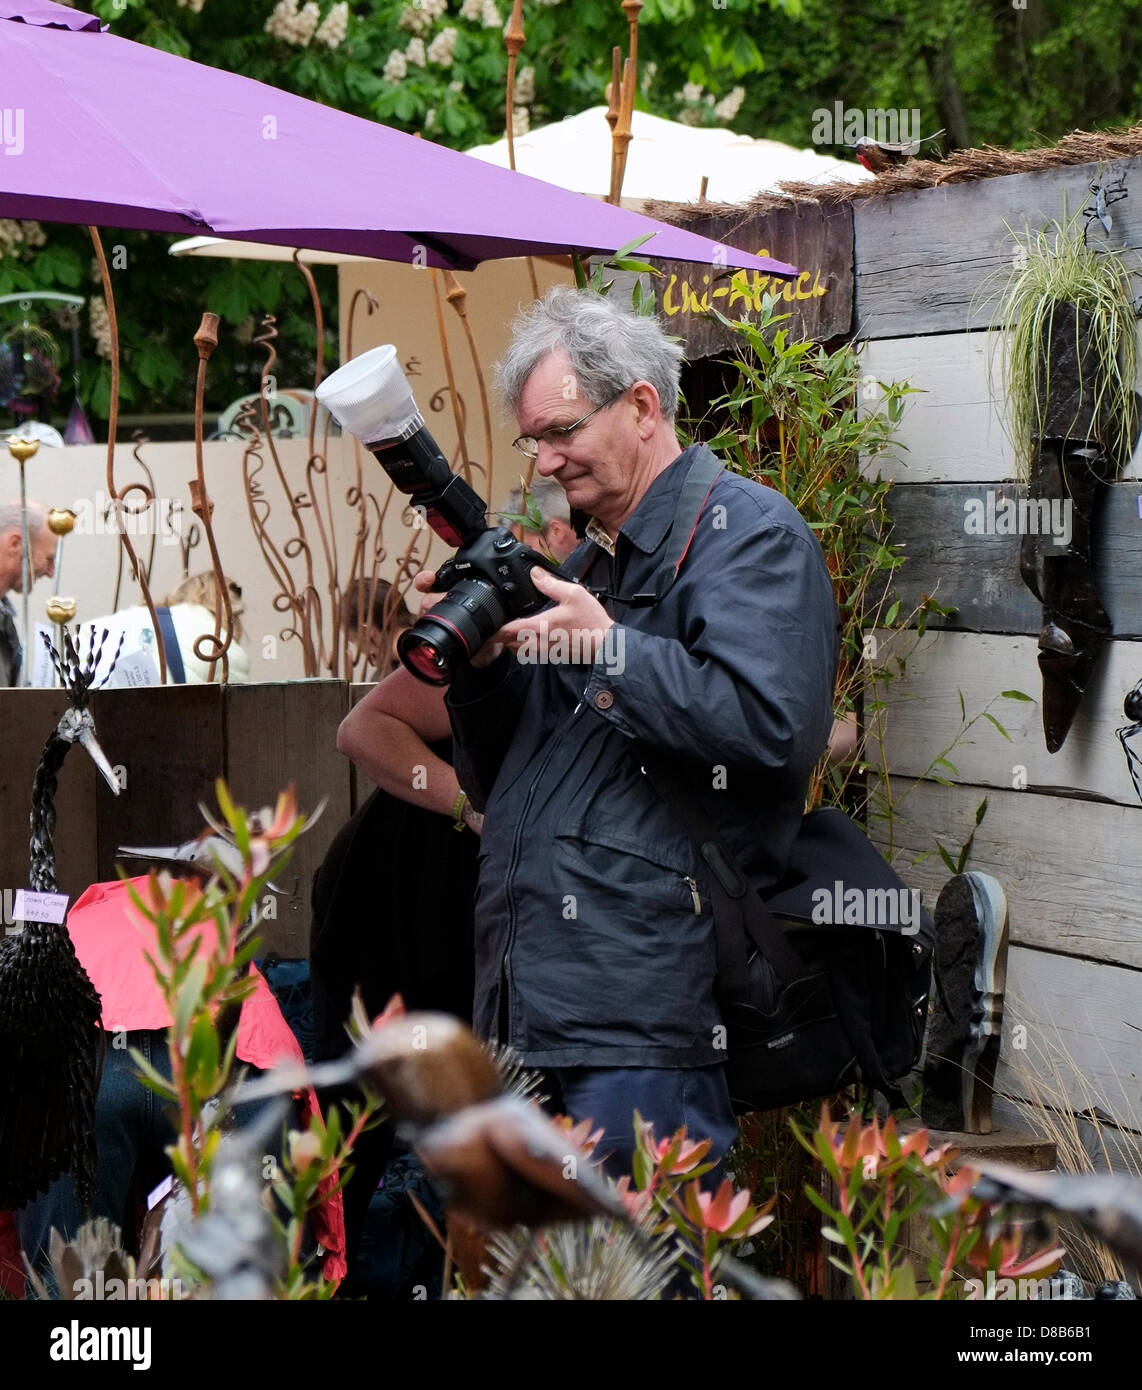 Martin Parr the photographer at work at the Chelea Flower show Stock Photo